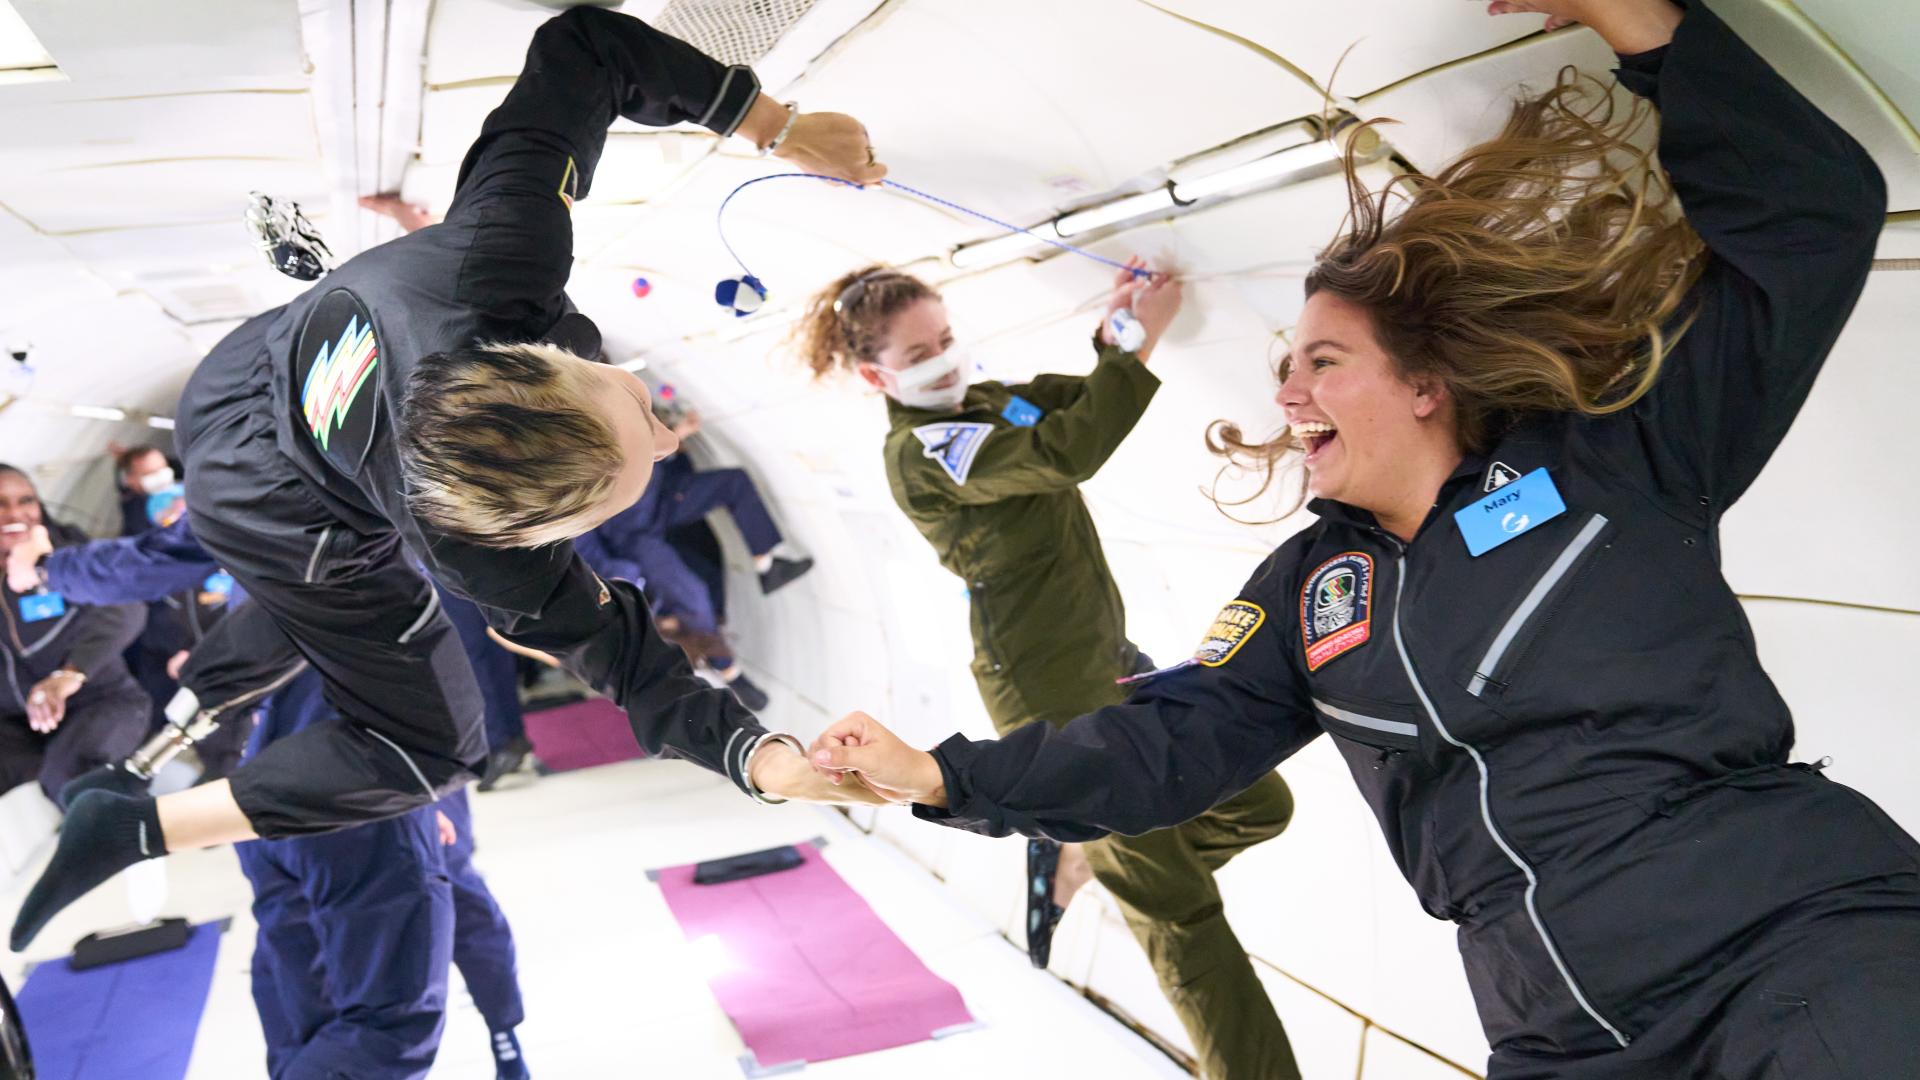 Woman laughs and holds hand with fellow space crew member (Photo: AstroAccess)